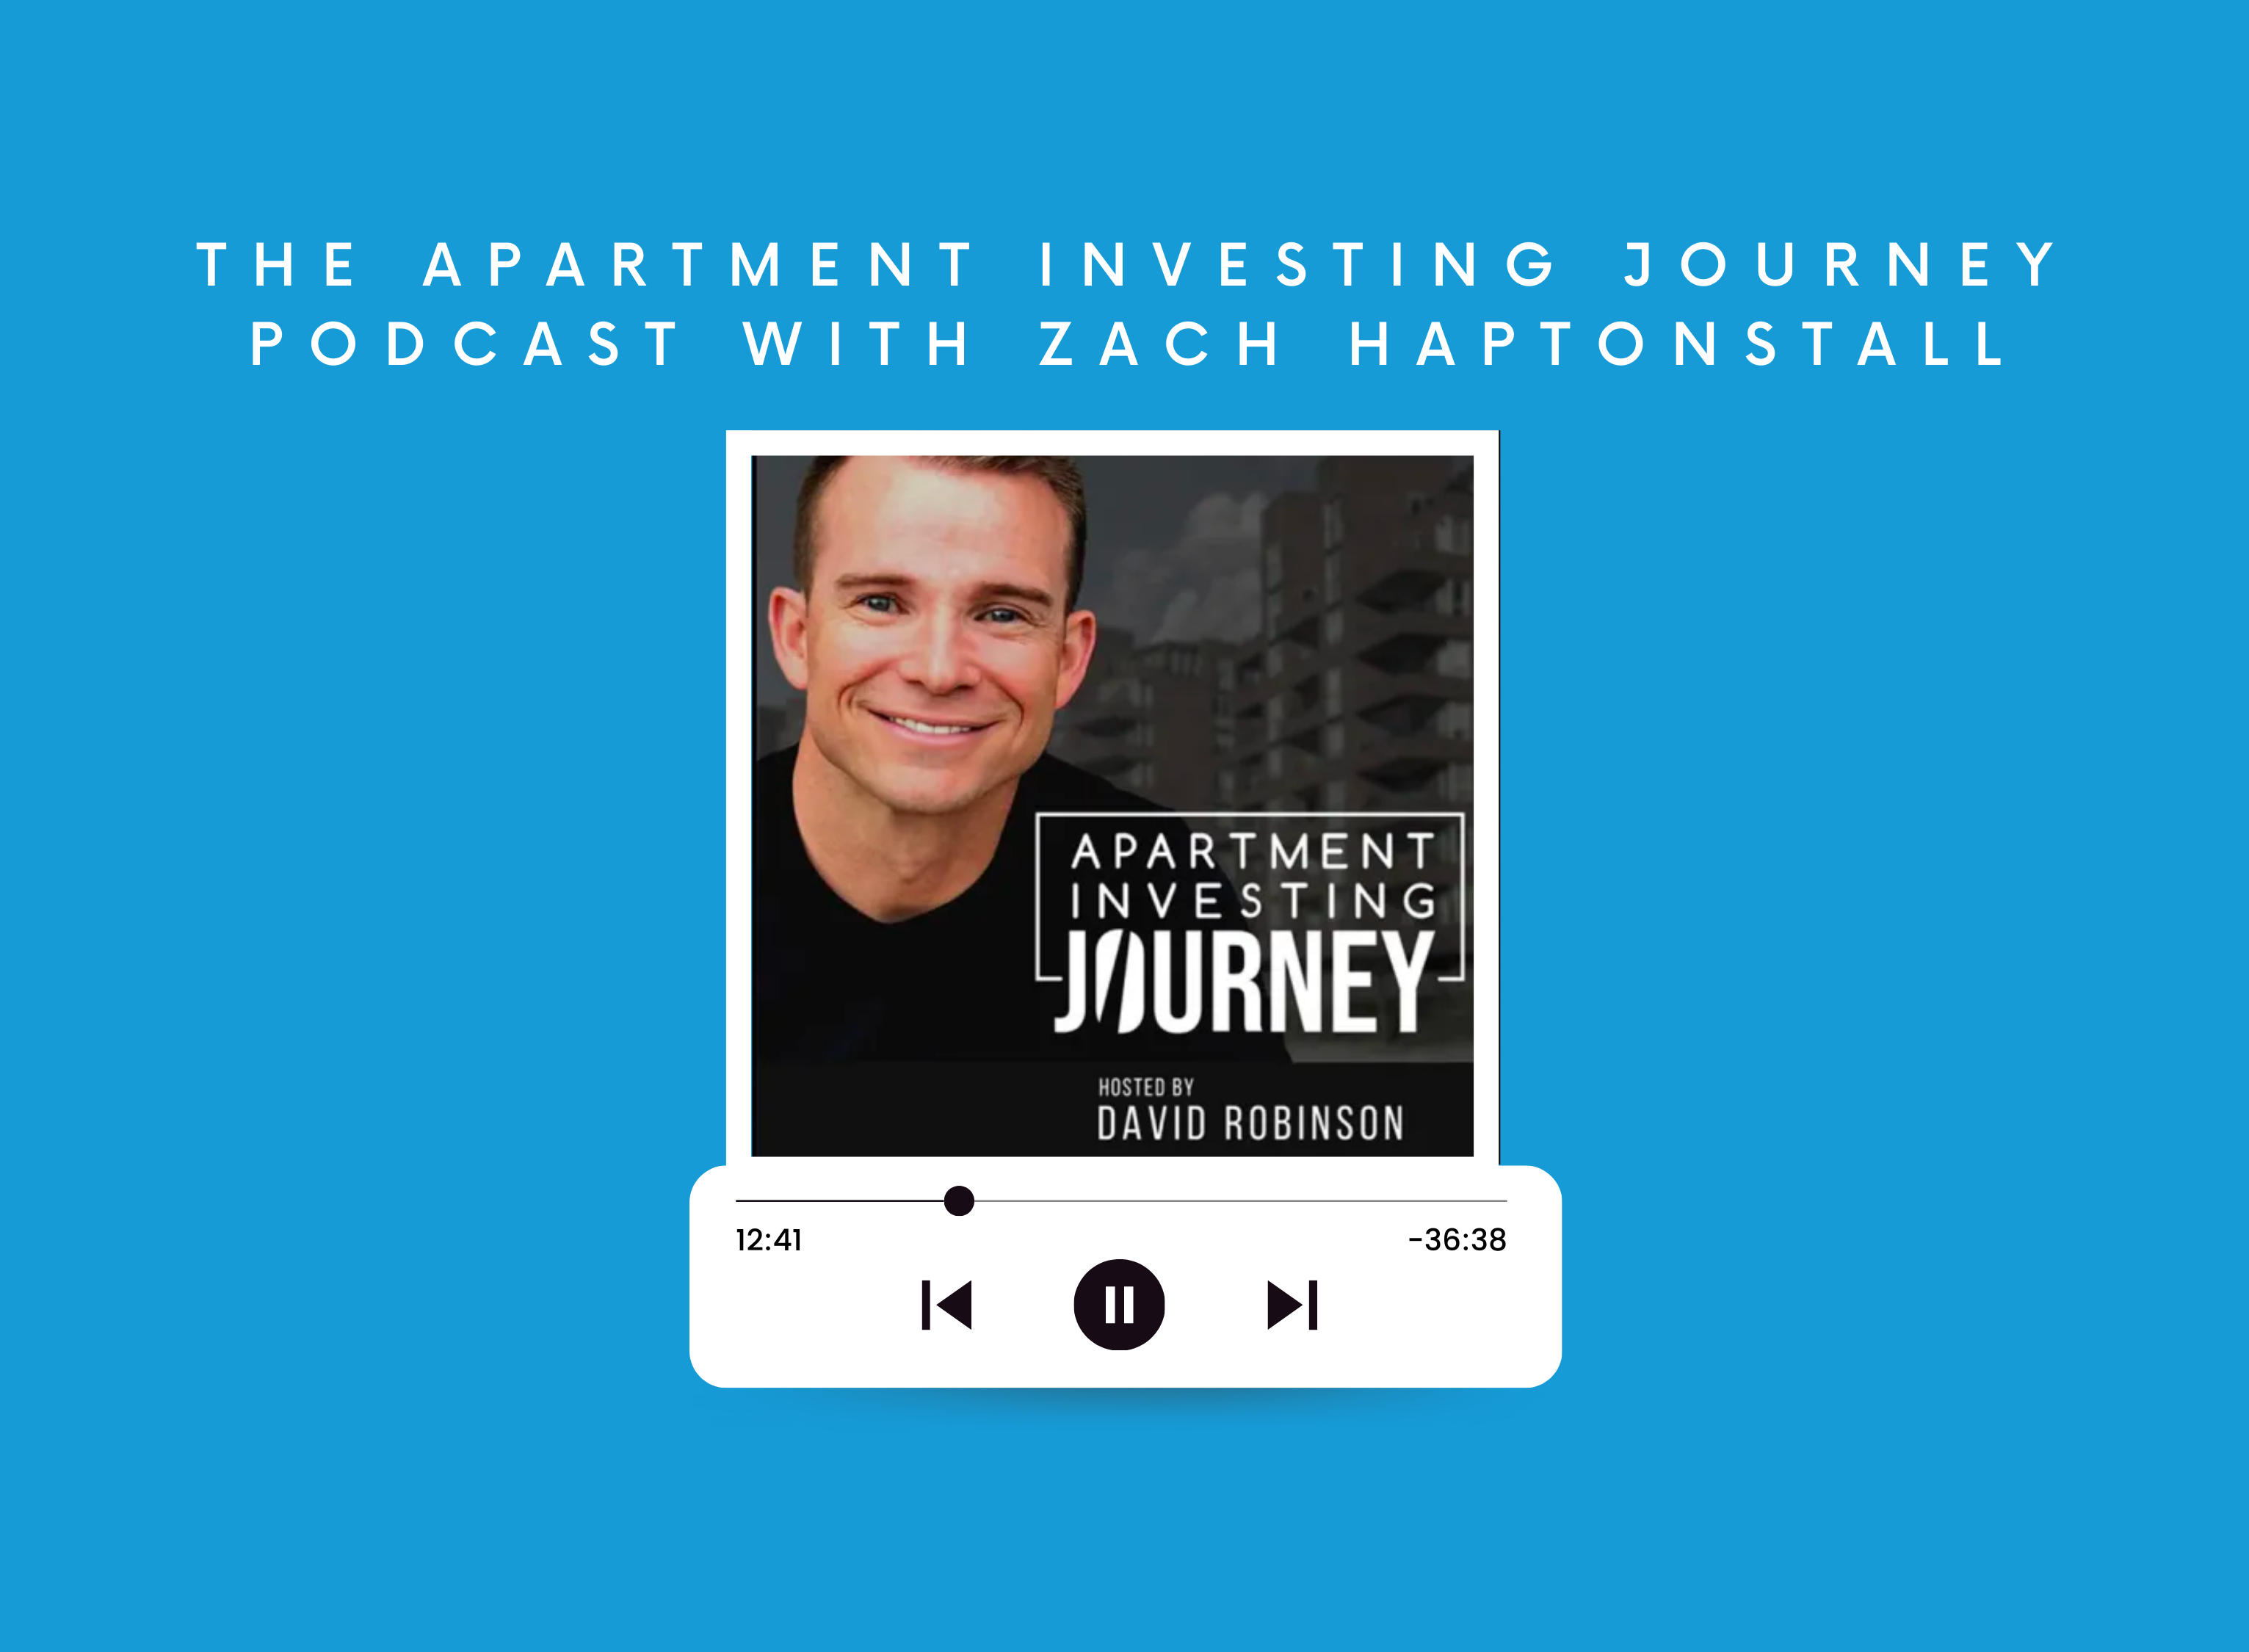 The Apartment Investing Journey Podcast